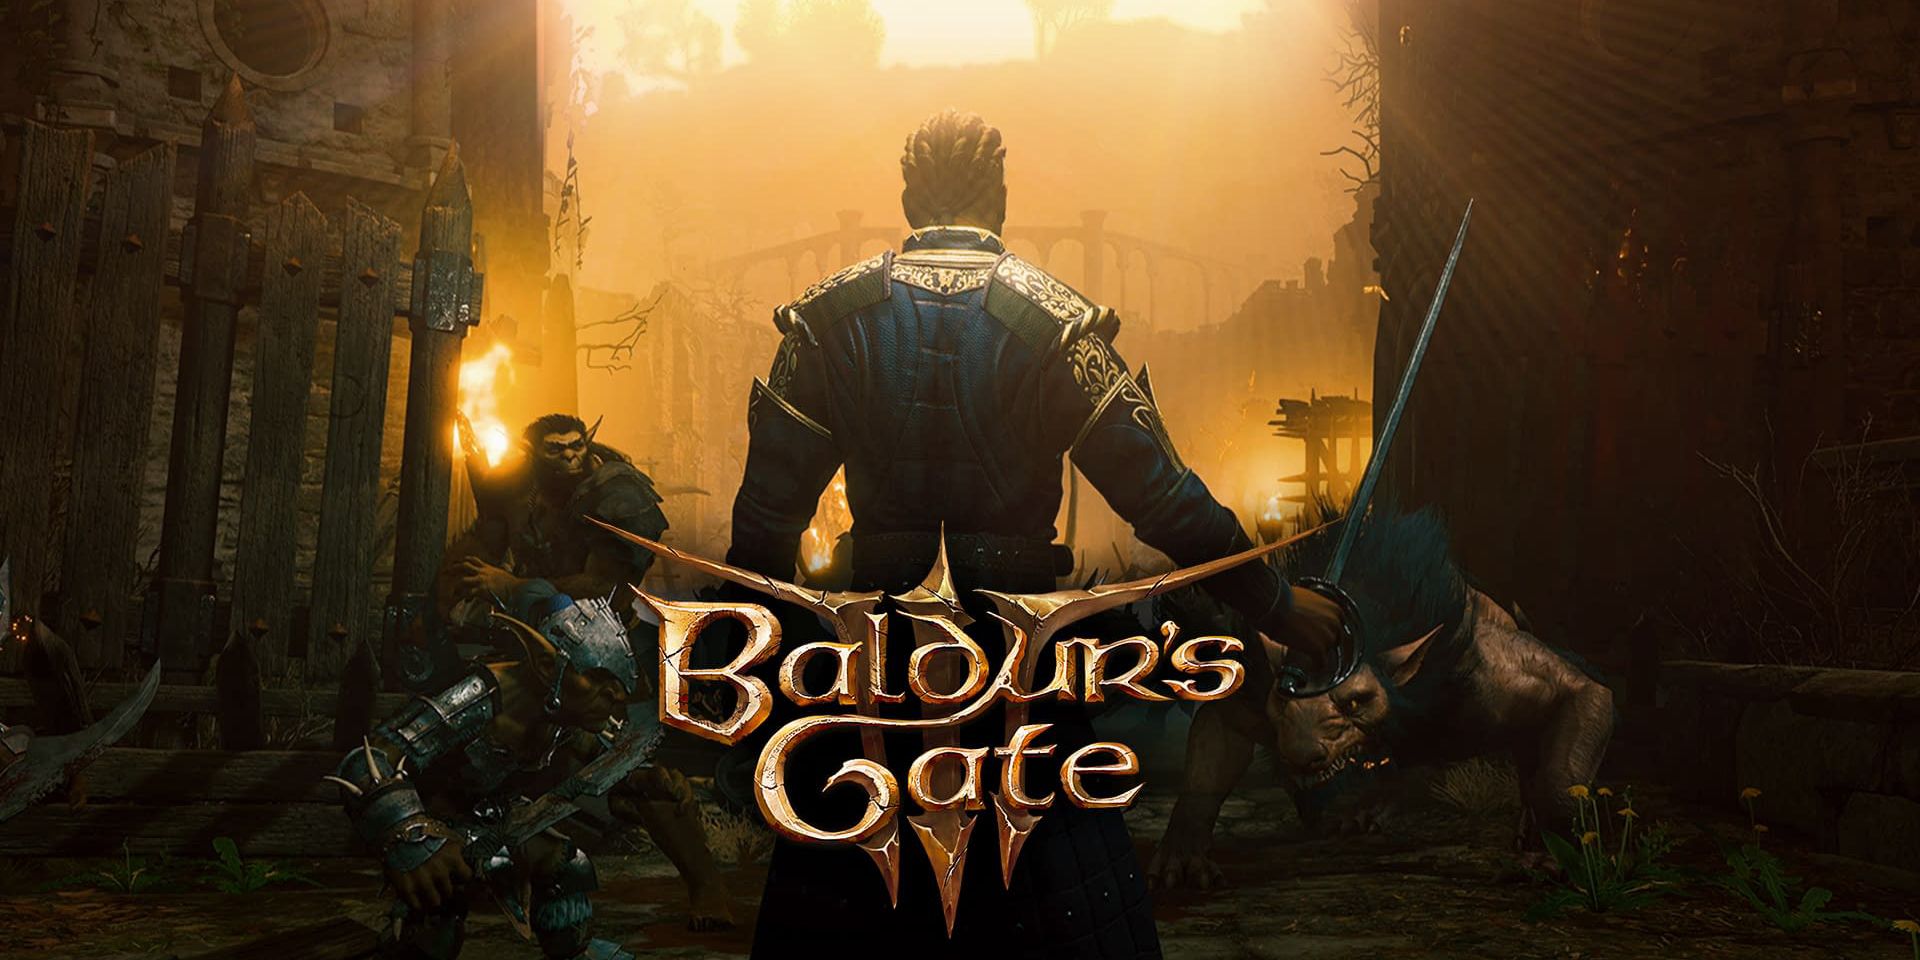 Image showing the Baldur's Gate 3 logo over a character whose back is to the camera as they draw a sword while surrounded by enemies.